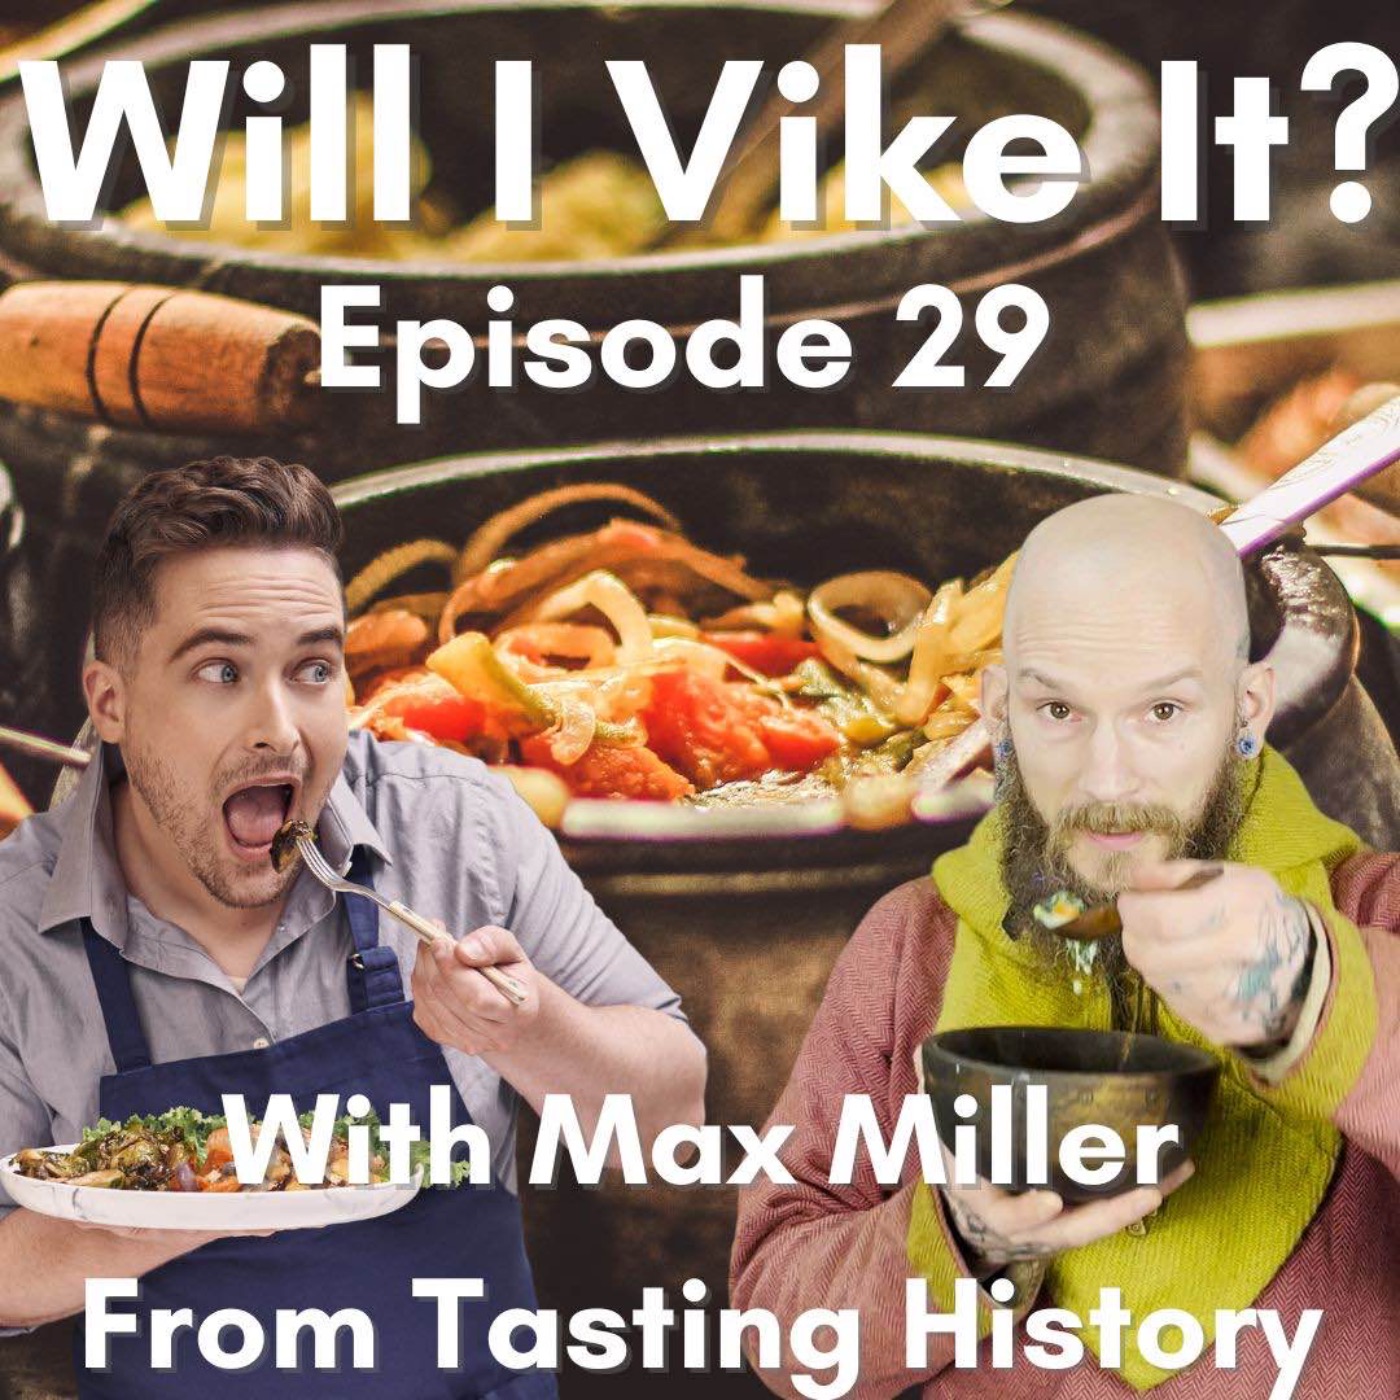 Max Miller from Tasting History